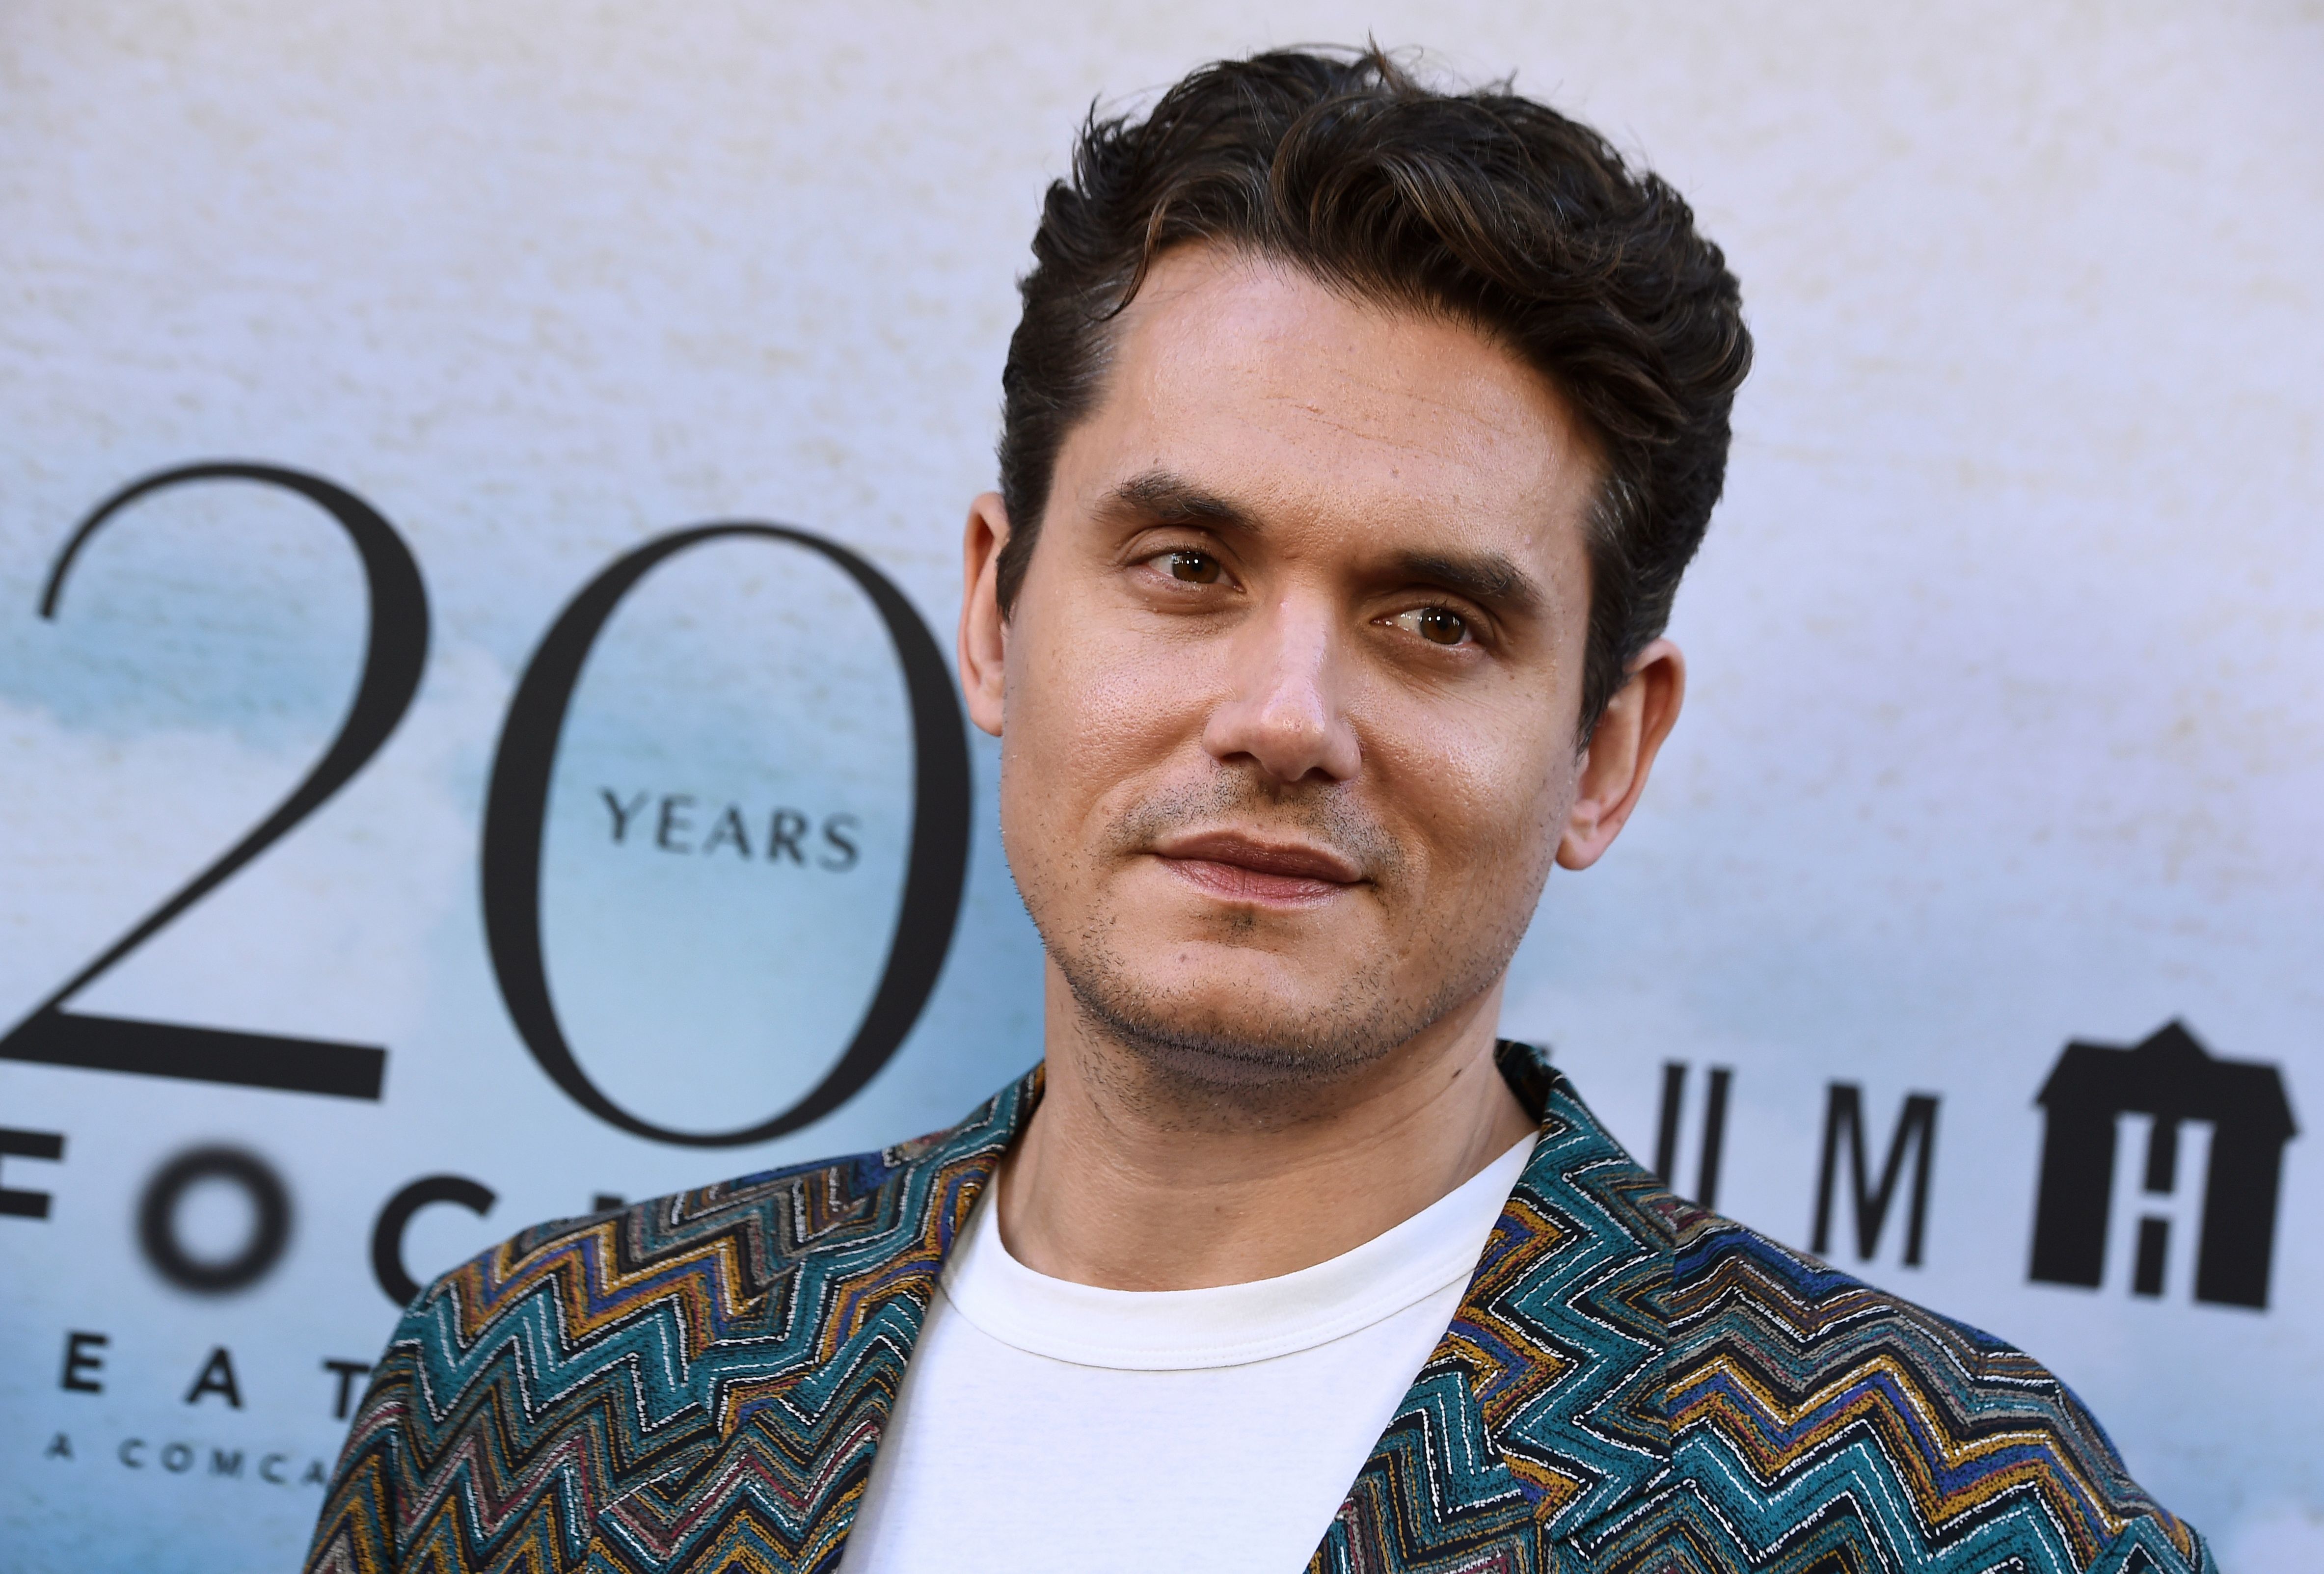 John Mayer all the women he's dated, Your Body is a Wonderland